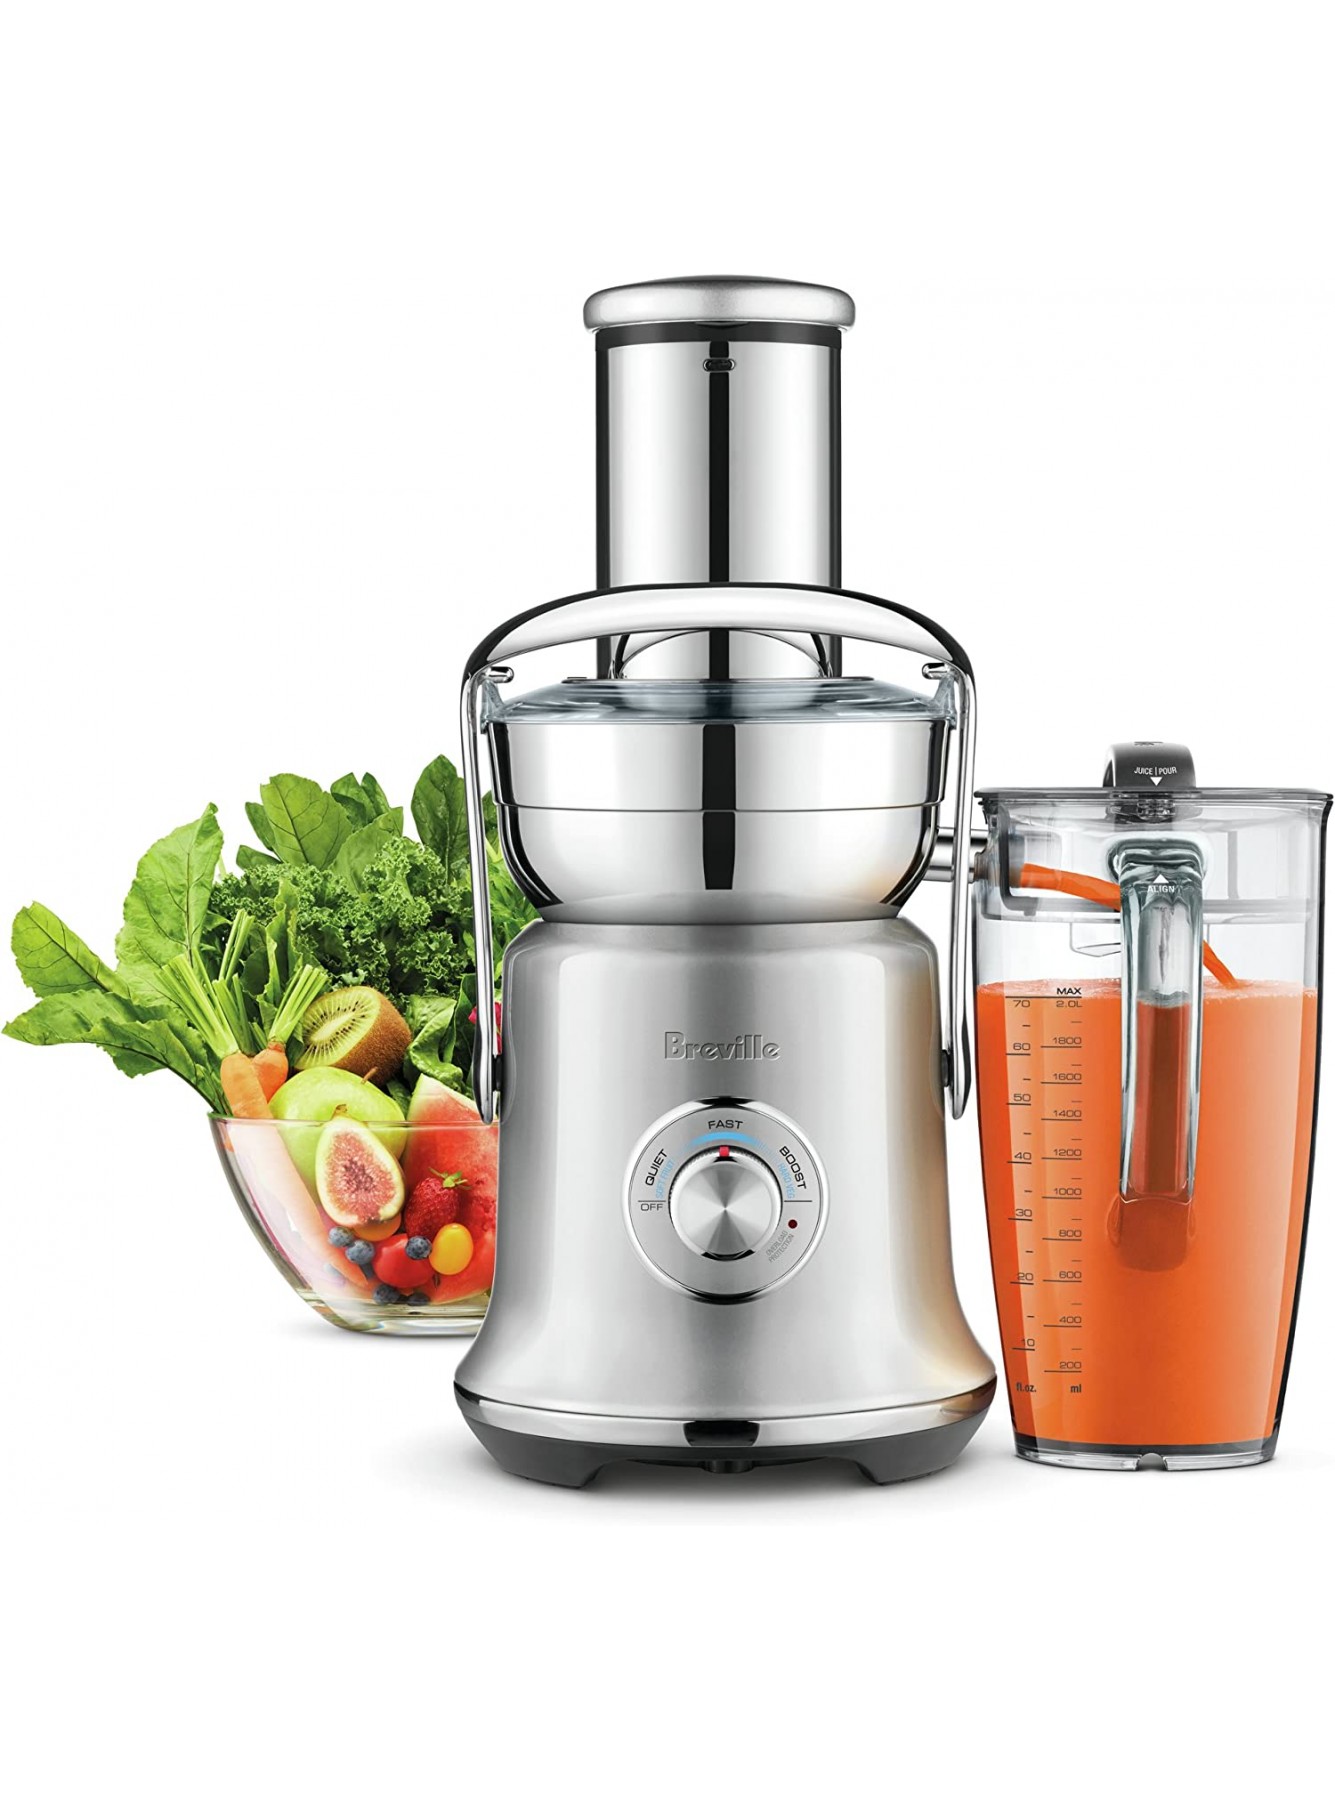 Breville BJE830BSS Juice Founatin Cold XL Centrifugal Juicer Brushed Stainless Steel B07KZ4ZBT5